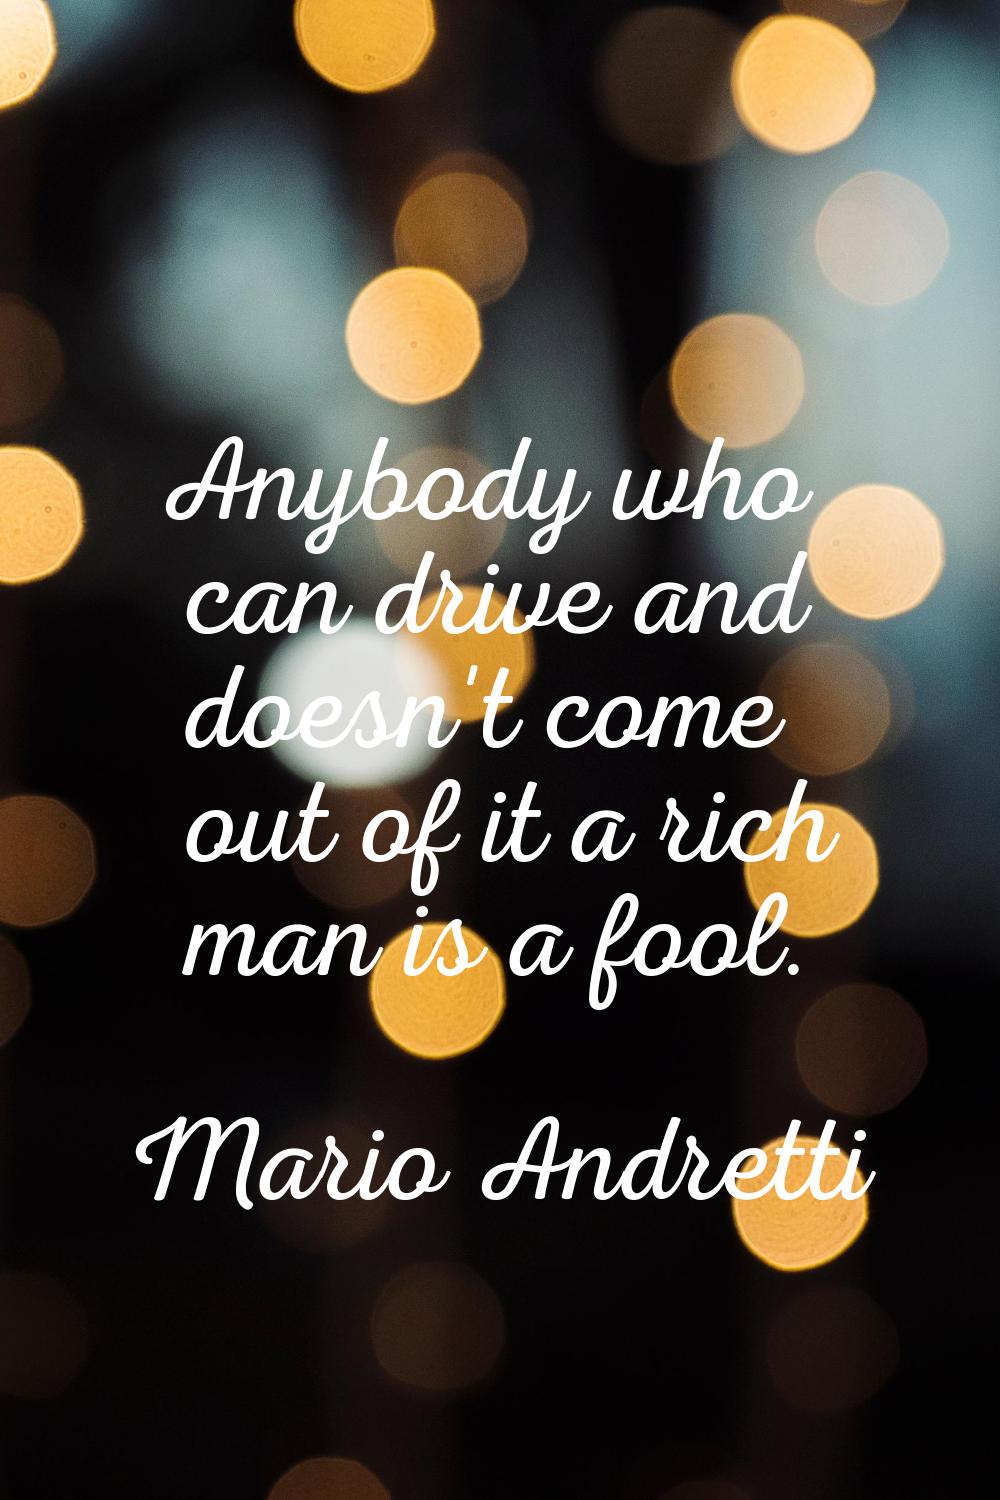 Anybody who can drive and doesn't come out of it a rich man is a fool.